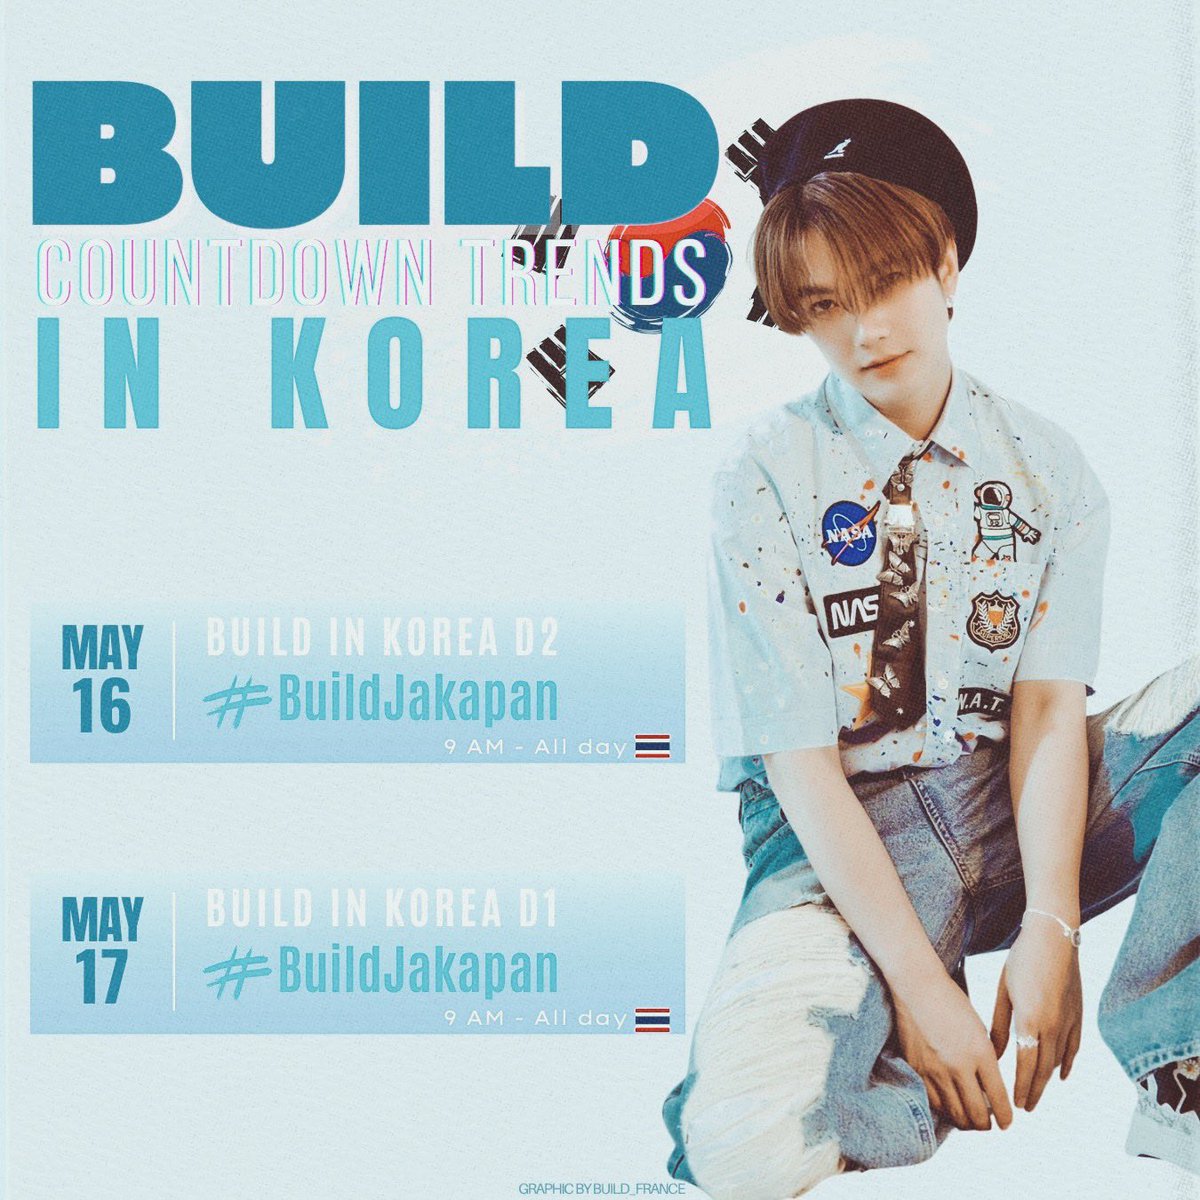 —📢 𝘽𝙐𝙄𝙇𝘿 𝙄𝙉 𝙆𝙊𝙍𝙀𝘼 - 𝘾𝙊𝙐𝙉𝙏𝘿𝙊𝙒𝙉 𝙏𝙍𝙀𝙉𝘿𝙎

Get ready, Beyourluves, the countdown to Build’s first fan meeting in South Korea starts on Thursday ! 🇰🇷💙

🗓️ Thursday, May 16th
🔑 BUILD IN KOREA D2
#️⃣ BuildJakapan
⏰ 9 AM - all day 🇹🇭

🗓️ Friday, May 17th
🔑